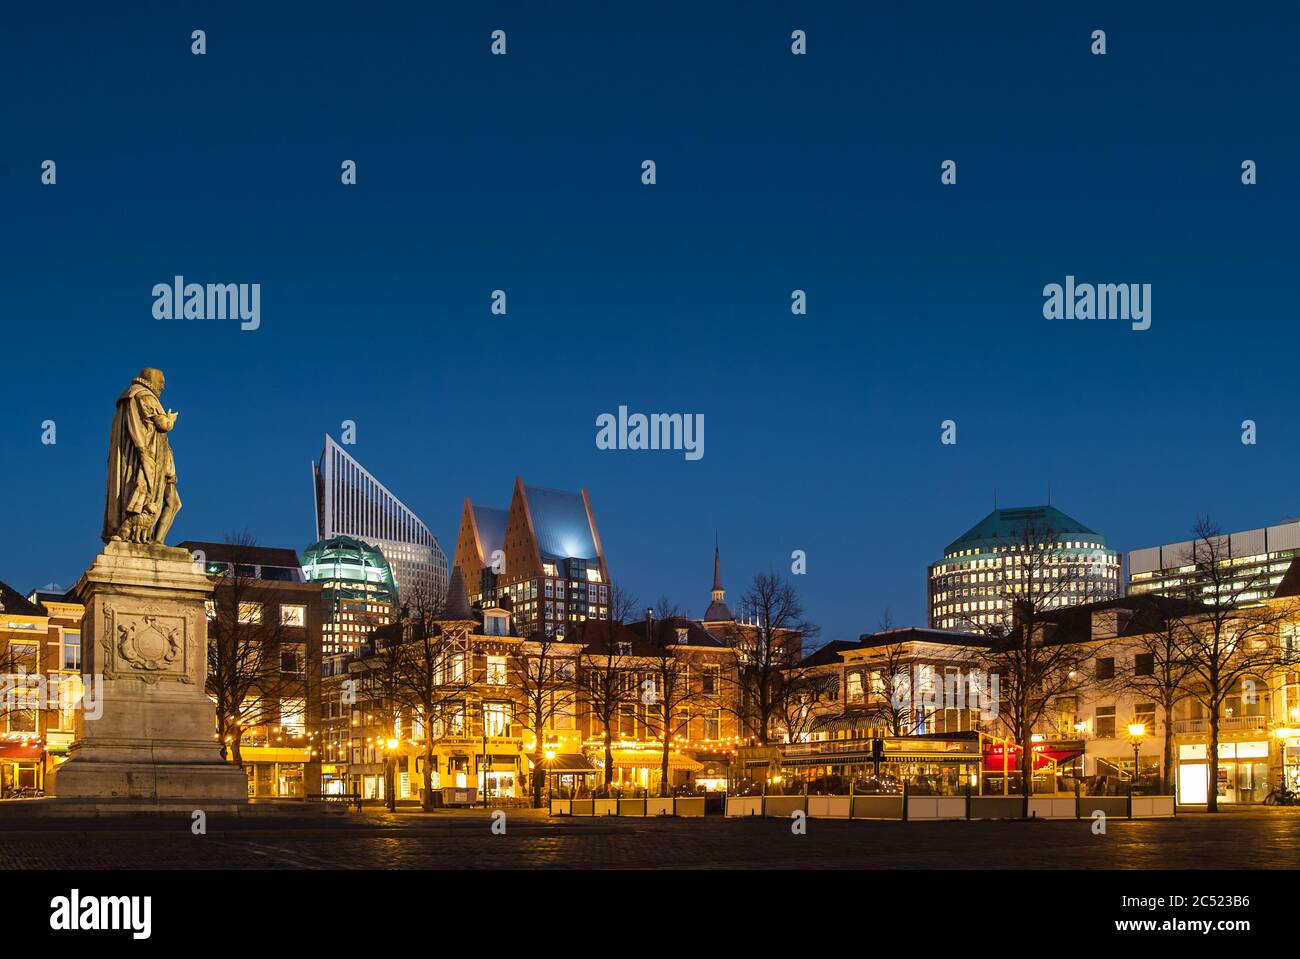 City center square of the Dutch town The Hague at night Stock Photo